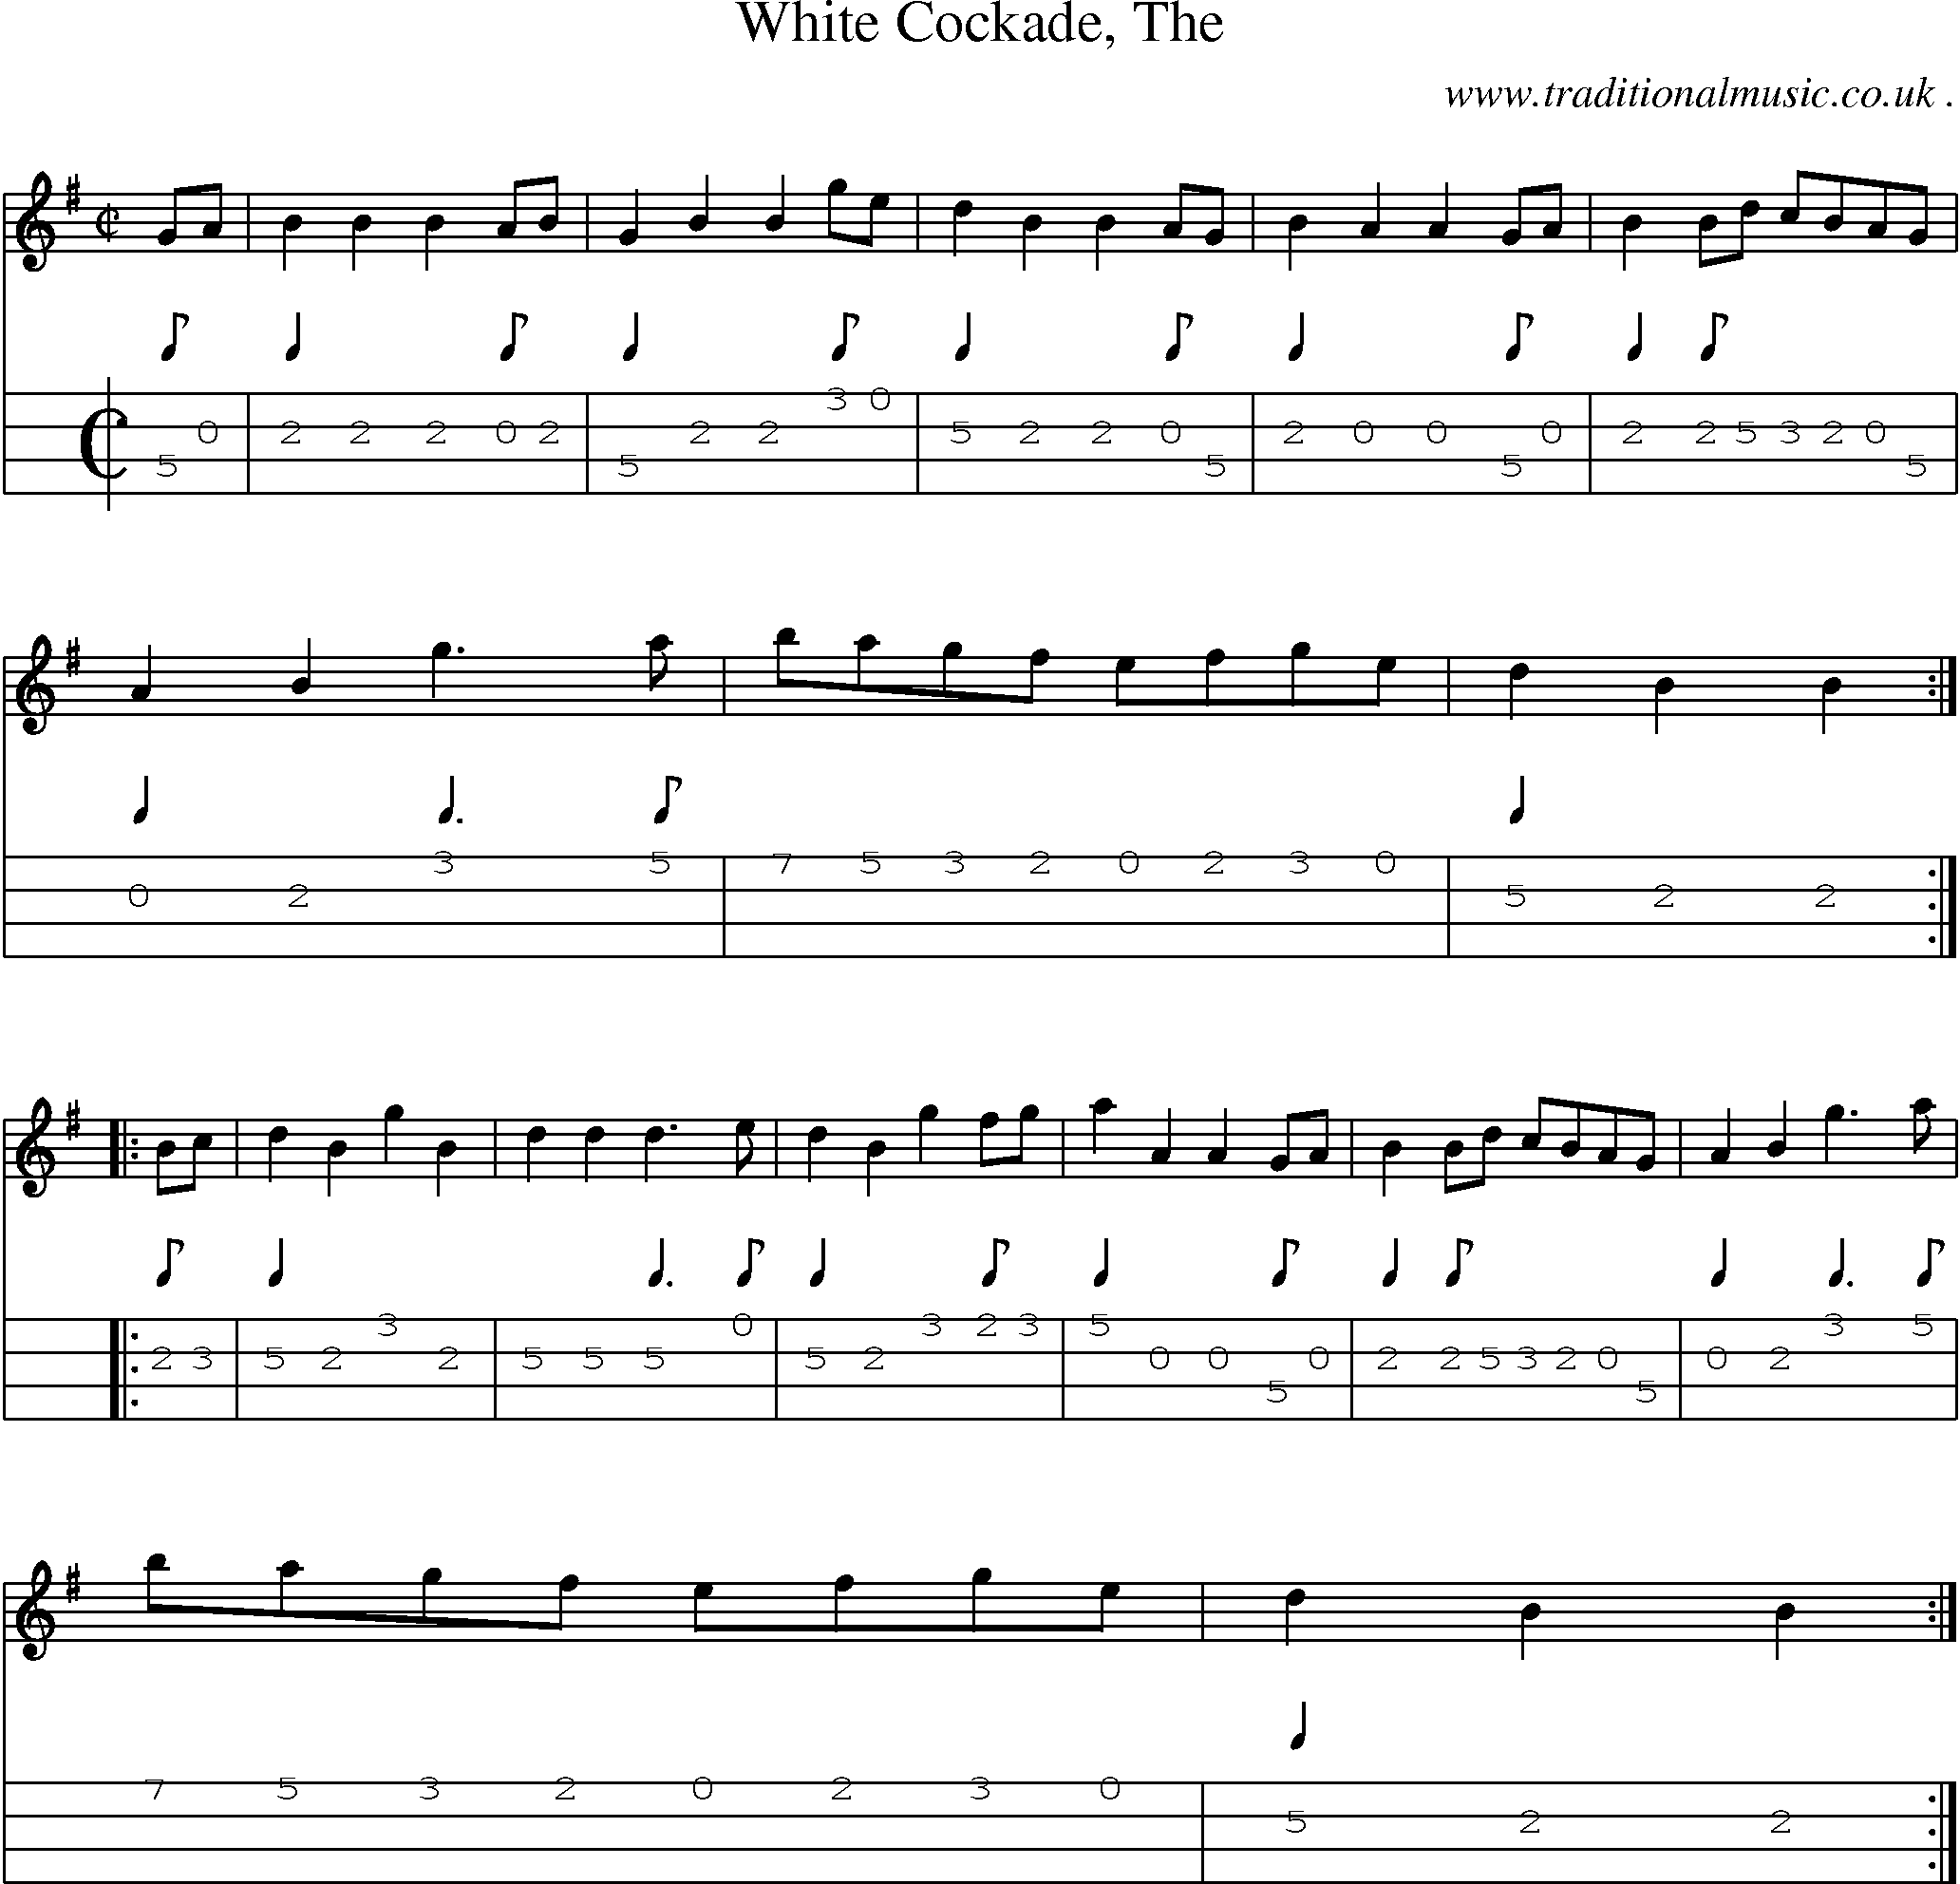 Sheet-music  score, Chords and Mandolin Tabs for White Cockade The